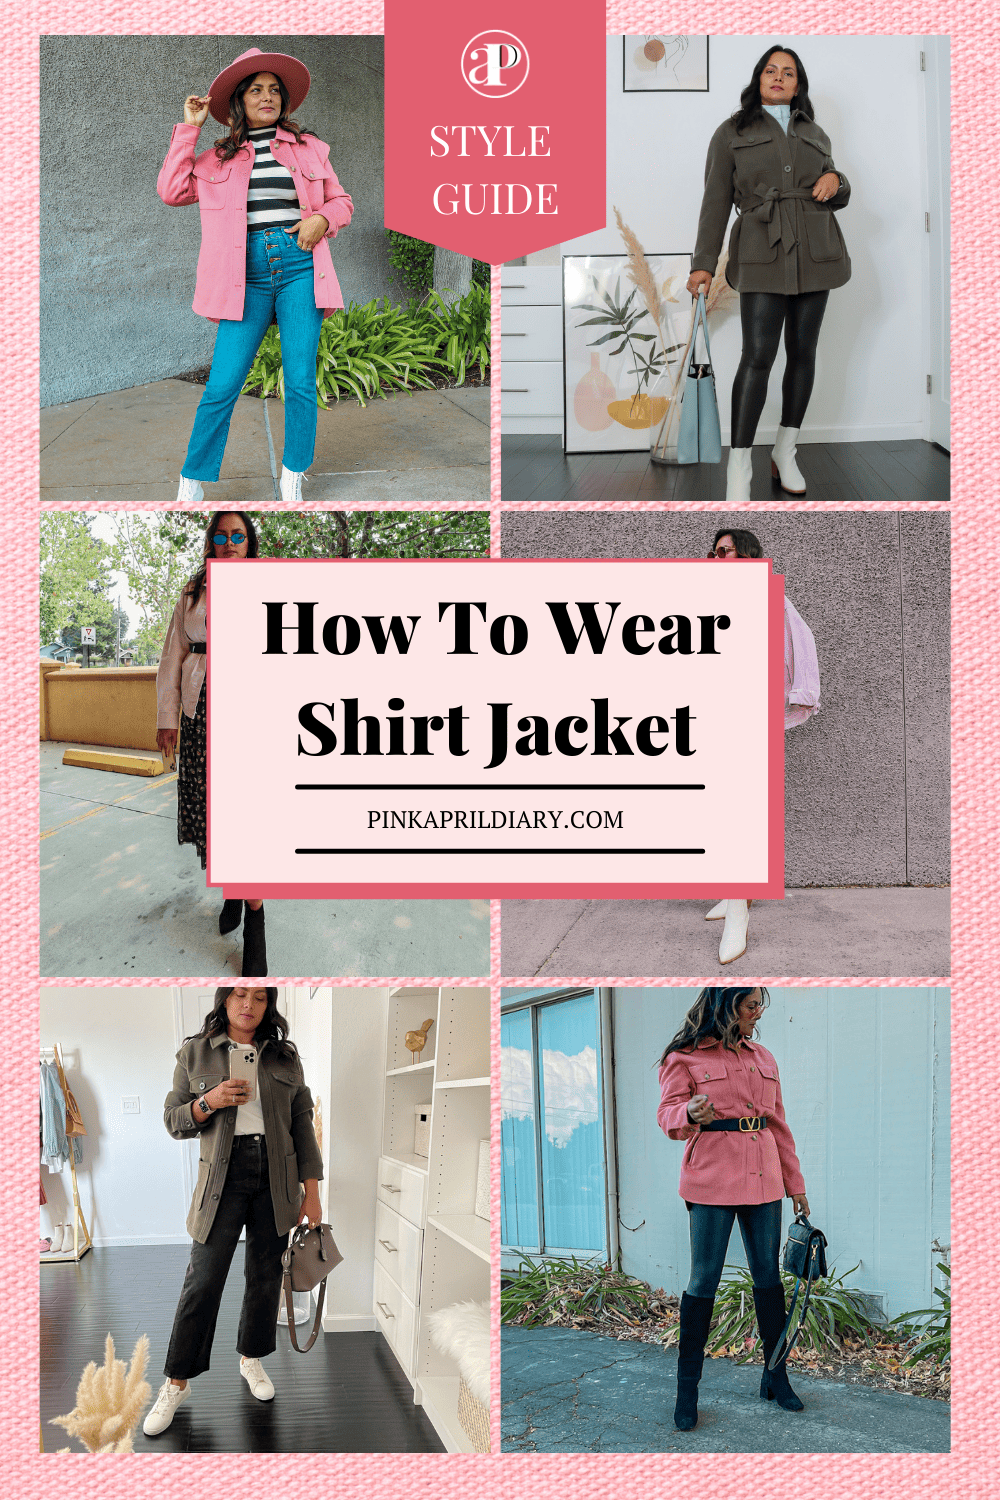 How to Look Chic in a Shirt Jacket This Fall & Winter